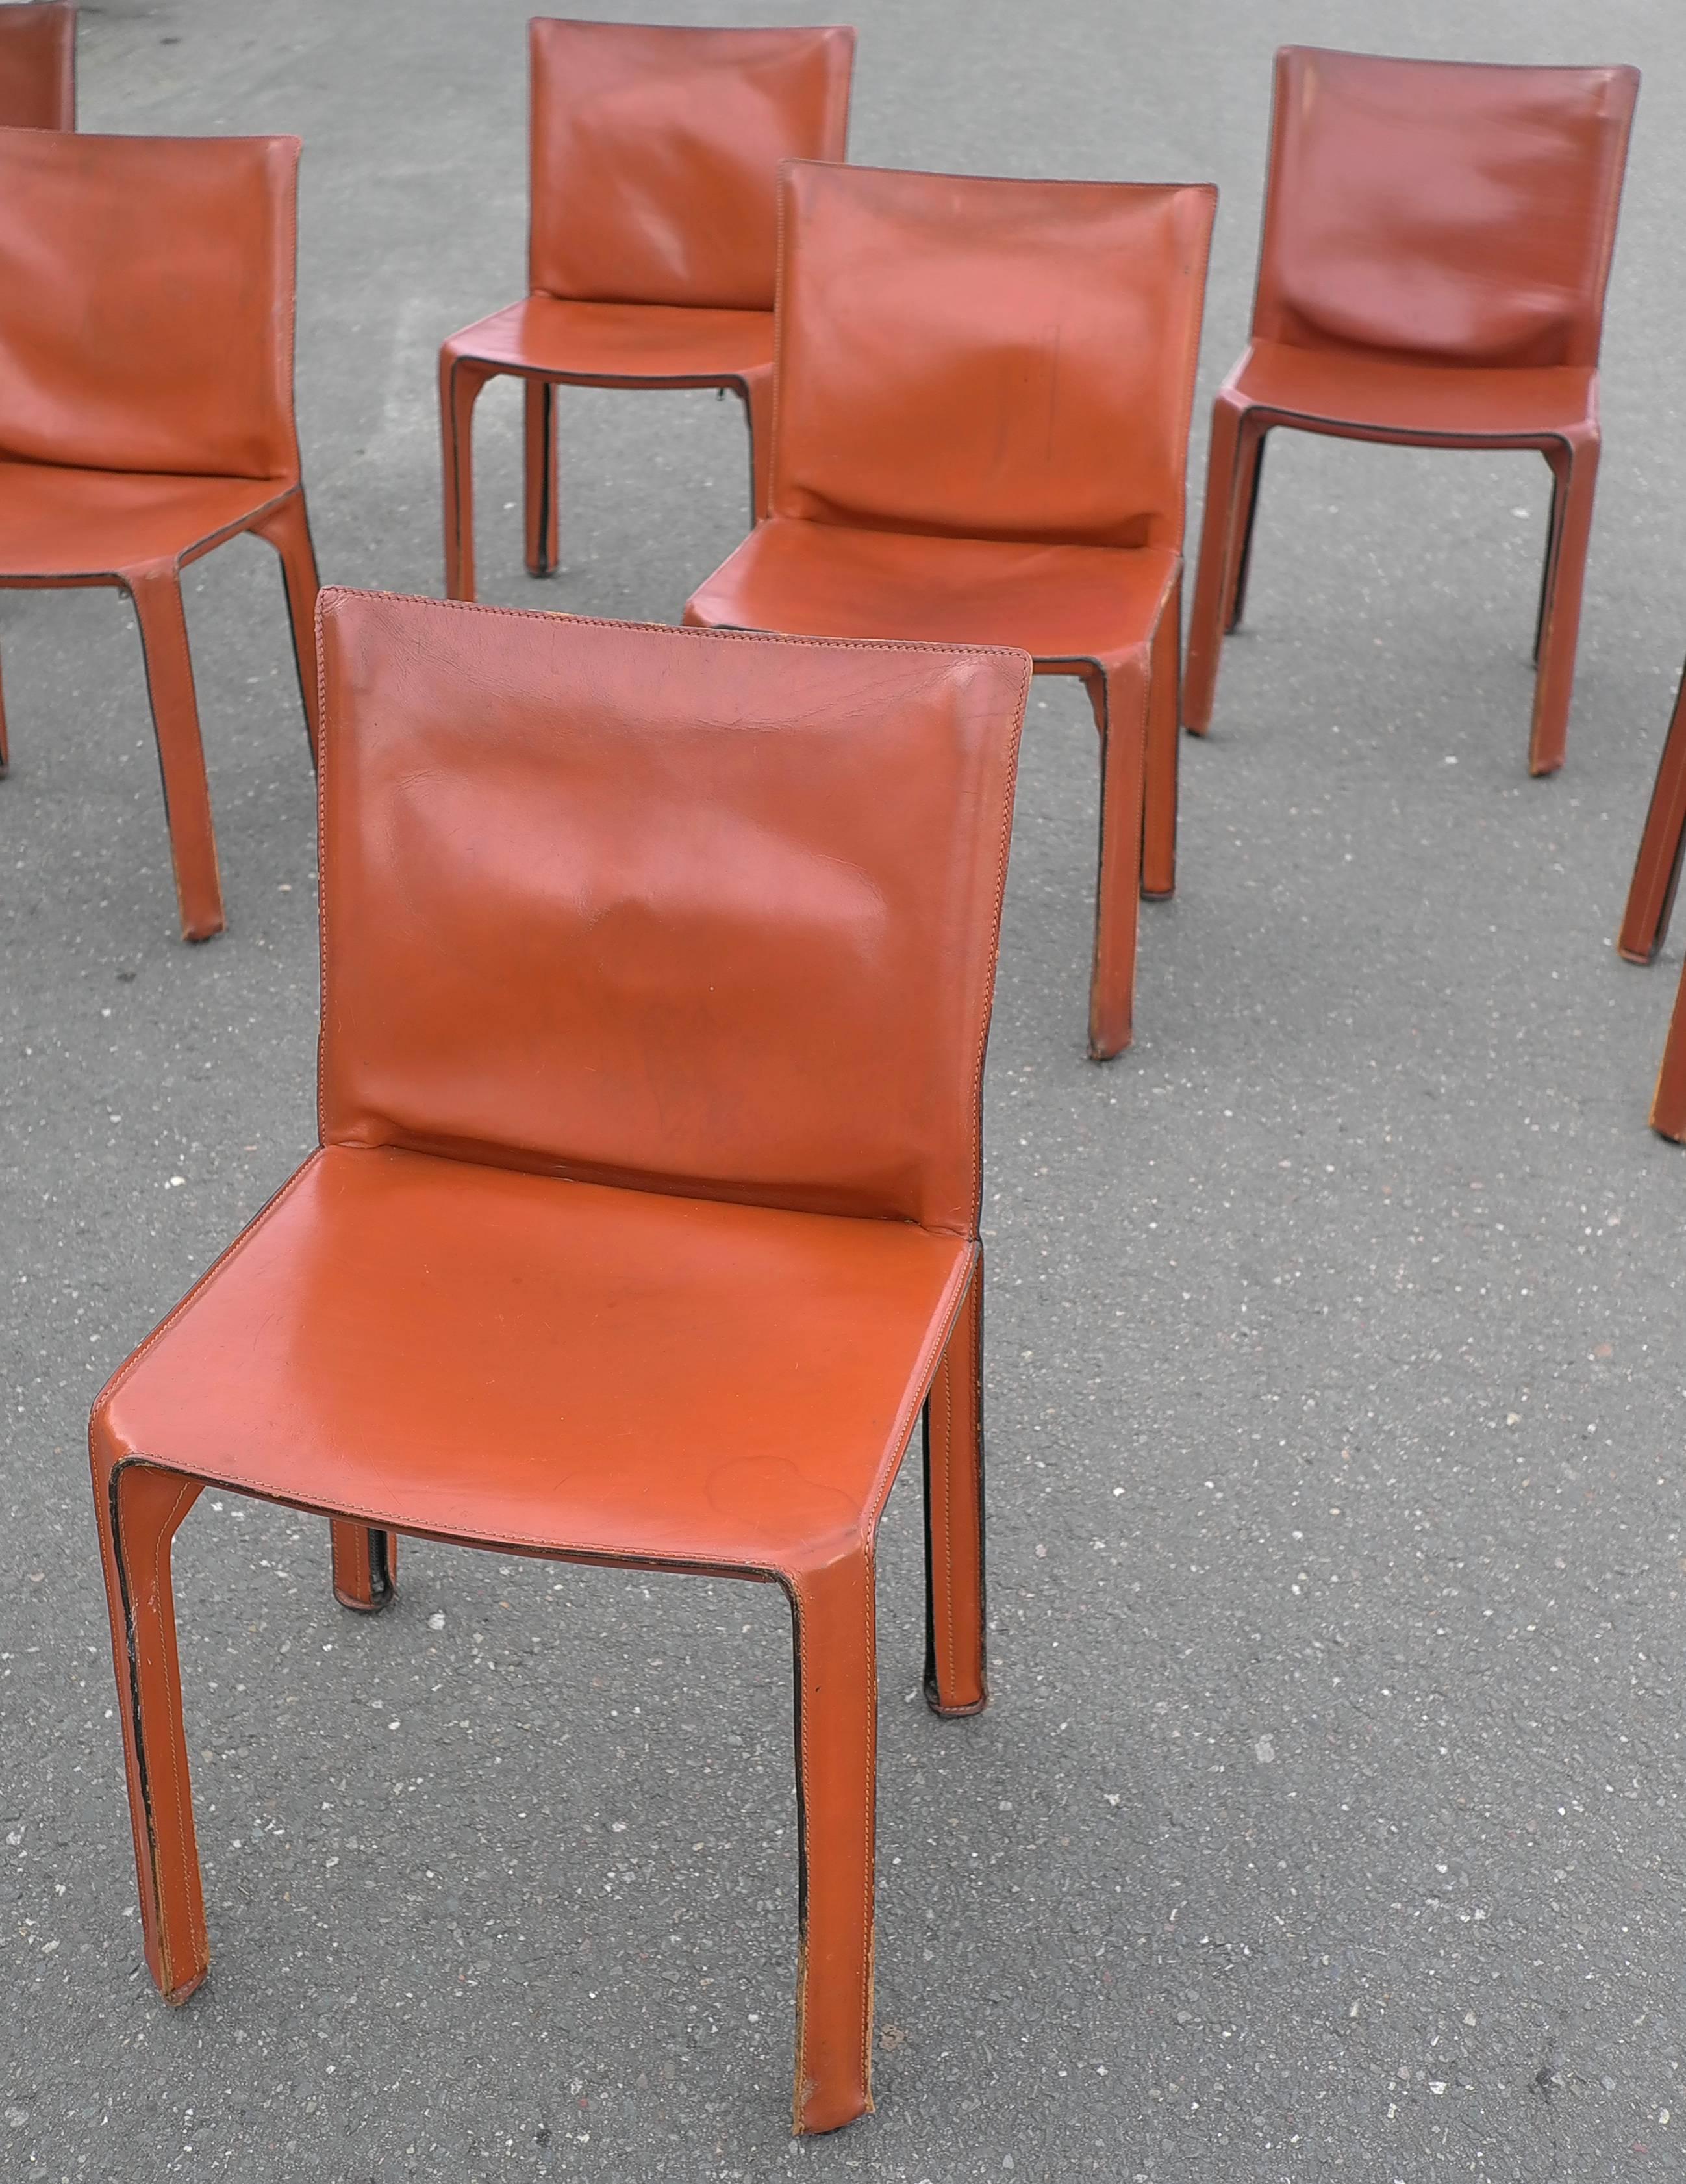 Set of eight cab chairs by Mario Bellini for Cassina, Italy, circa 1970s. 
Wonderful original patina and wear. Broken in like your favorite baseball glove. They have various patina, stains, rubs, scratches and wear. And we wouldn't have it any other